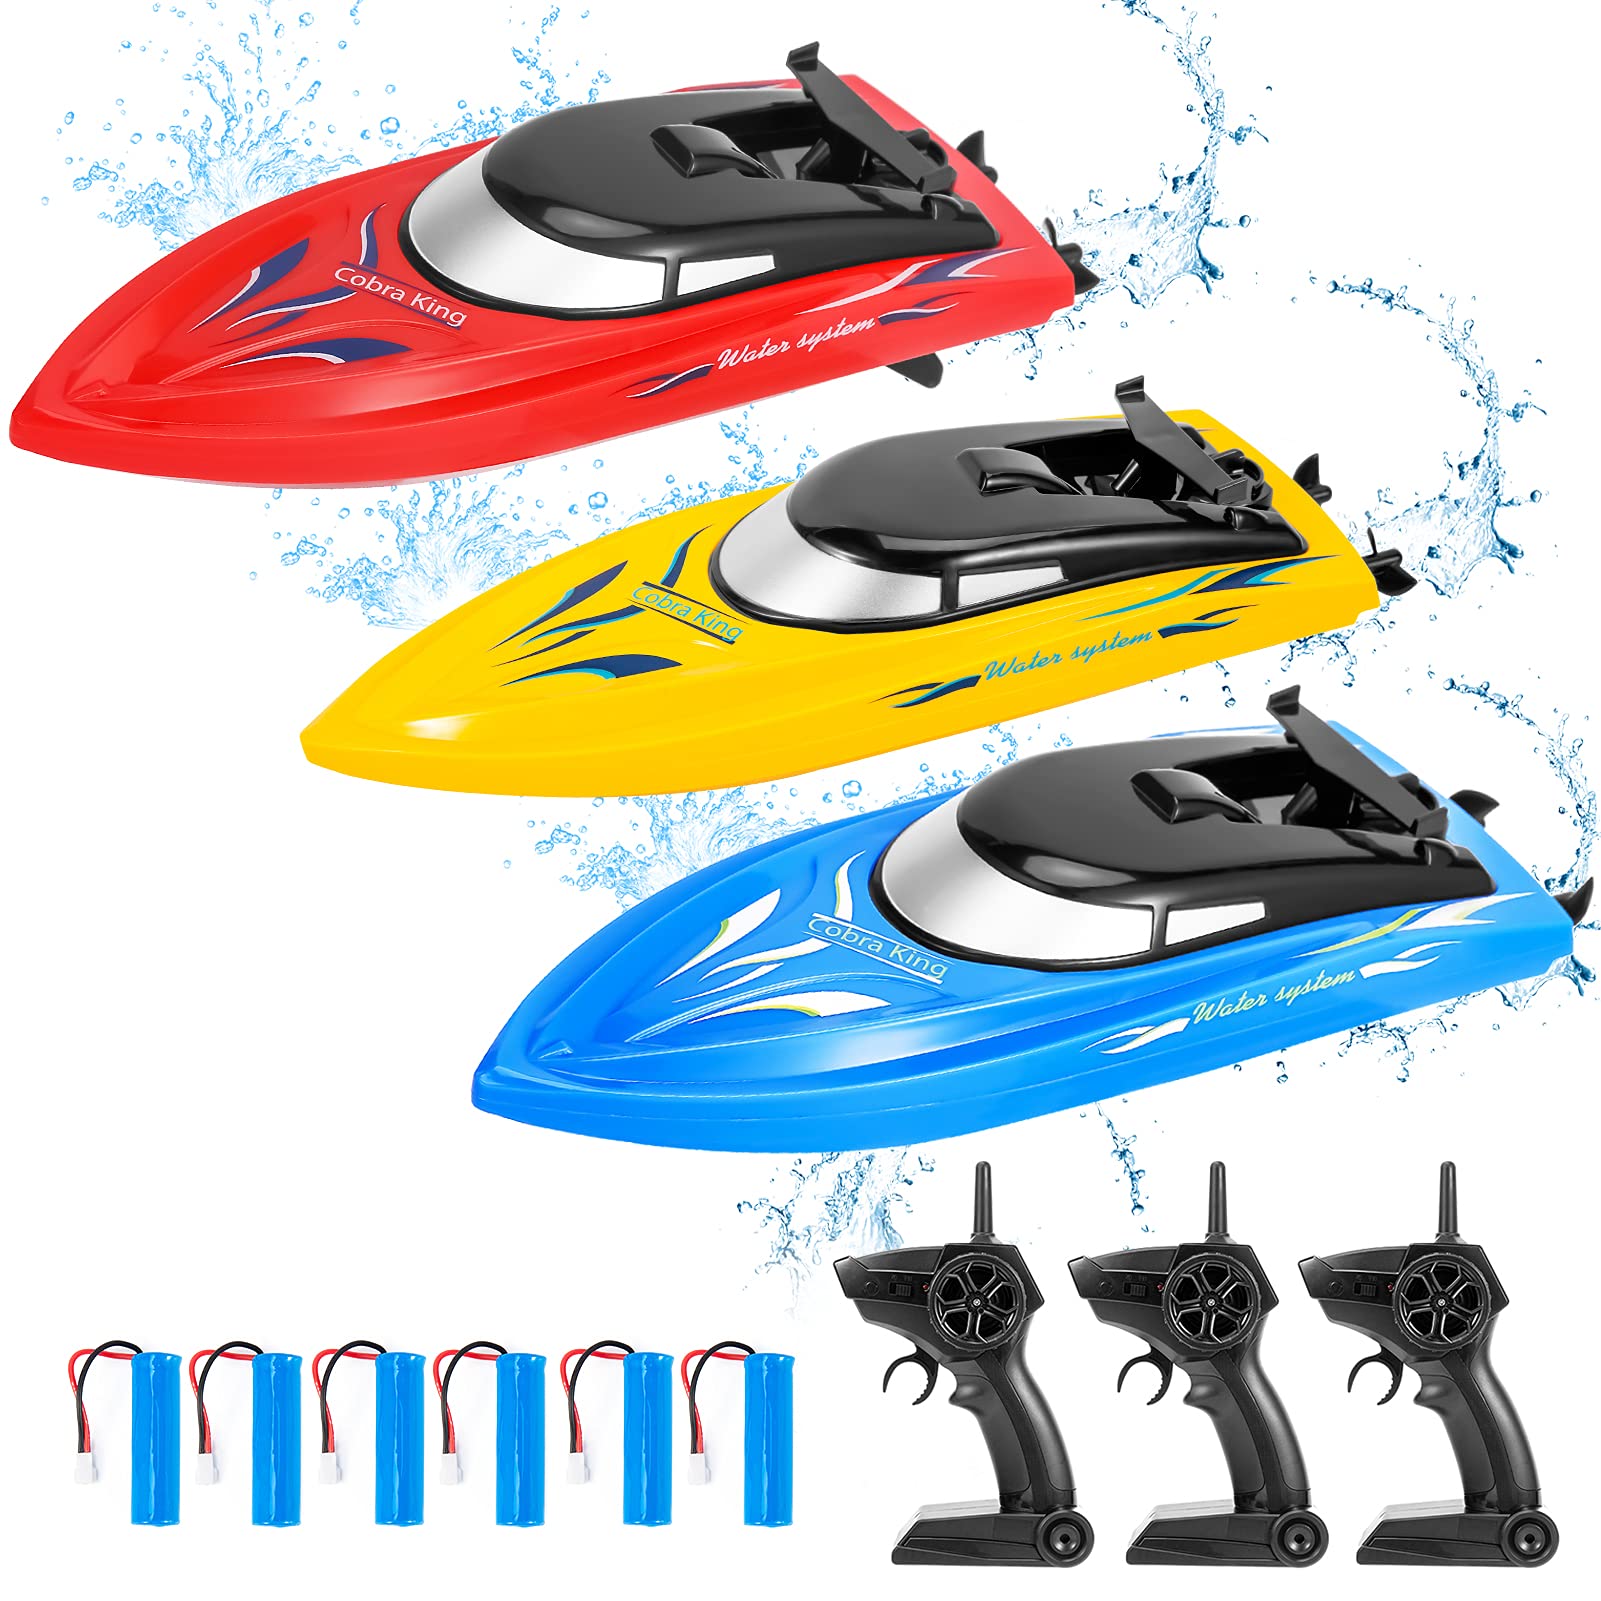 THINKMAX 3PACK 10km/H 2.4G High Speed Remote Control Boats (Blue+Yellow+Red)